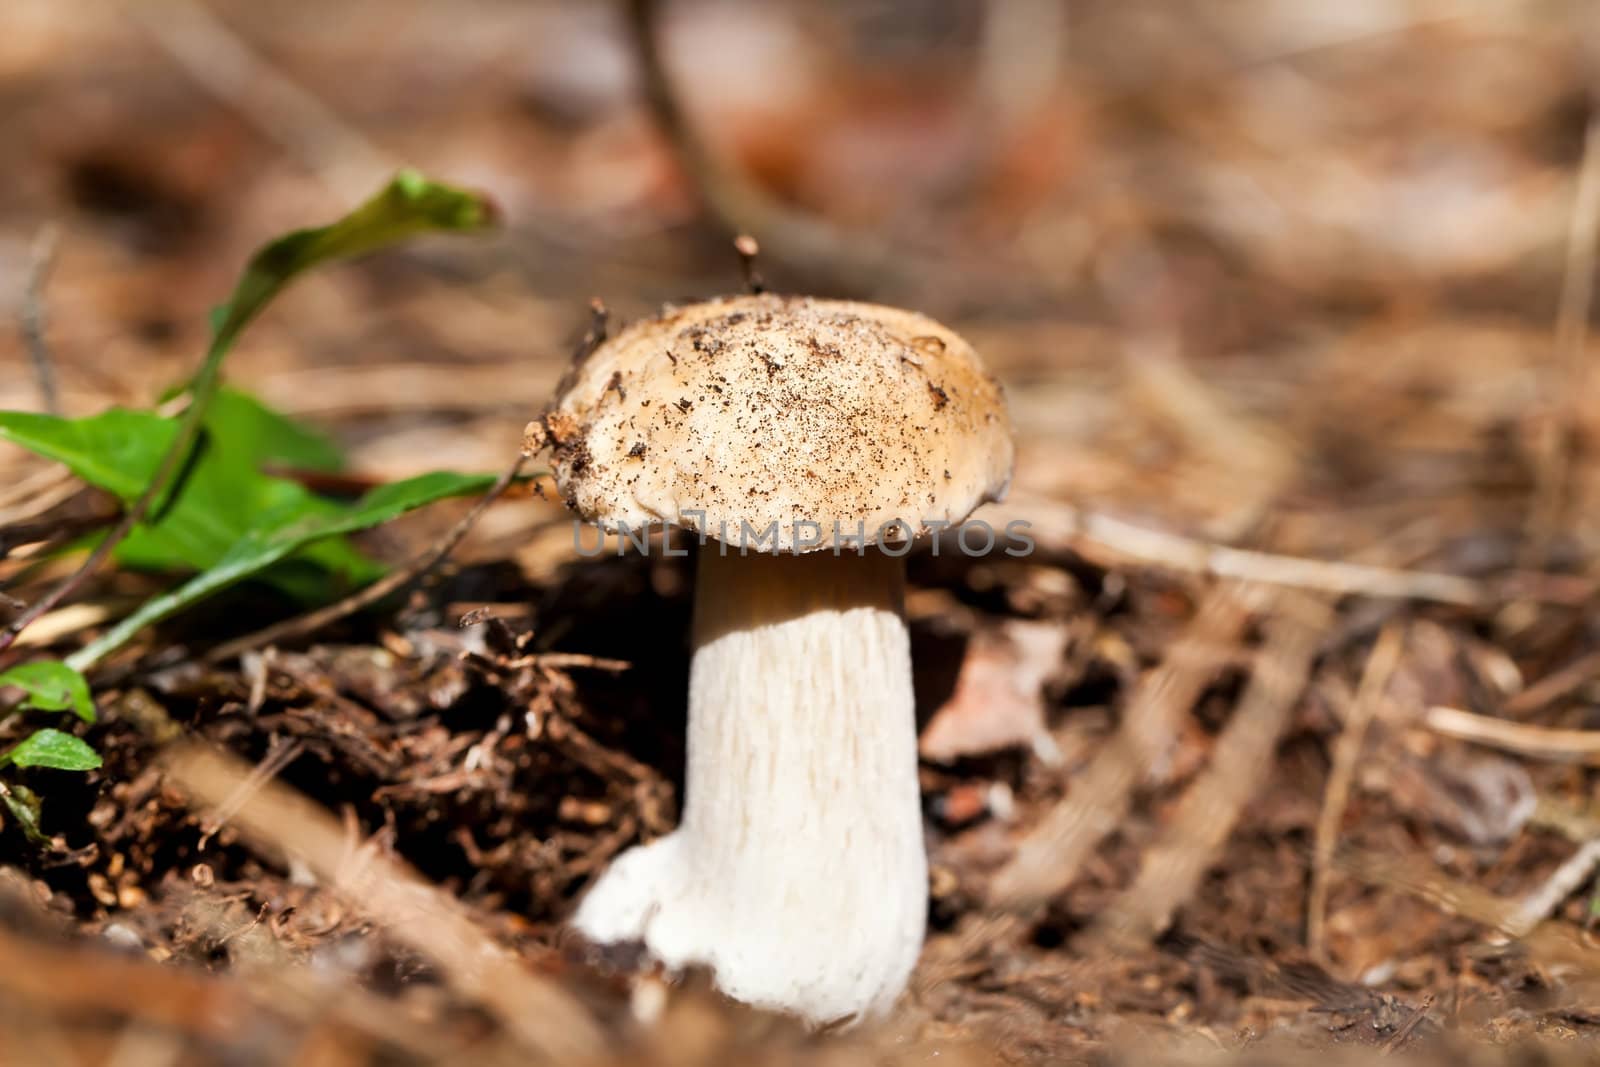 Cep mushroom in forest close view